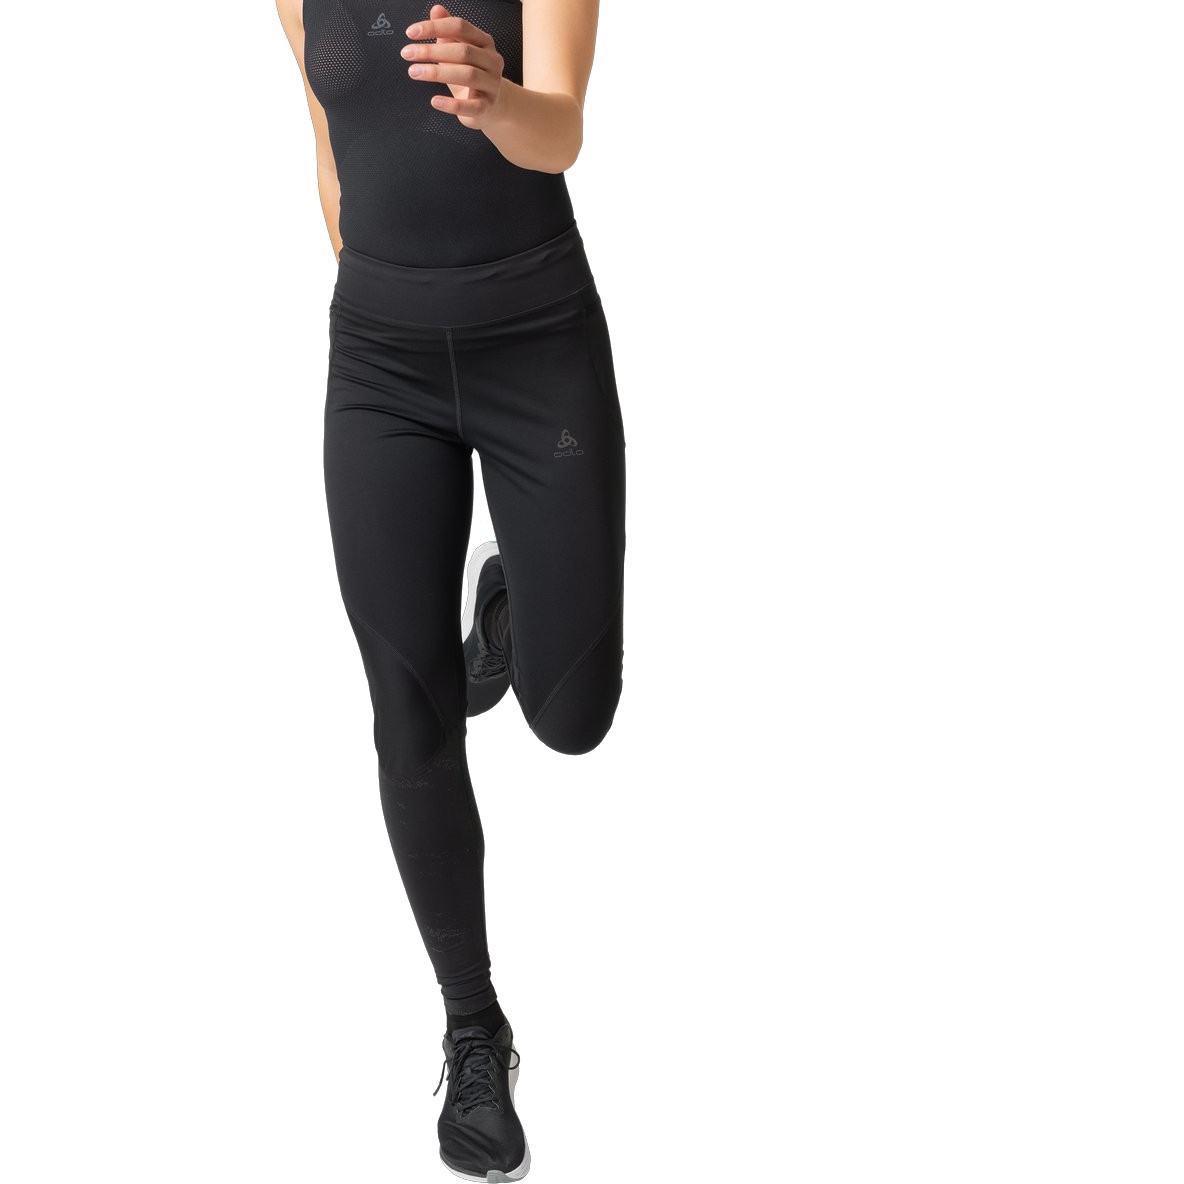 Picture of Odlo Zeroweight Warm Reflective Running Tights Women - black